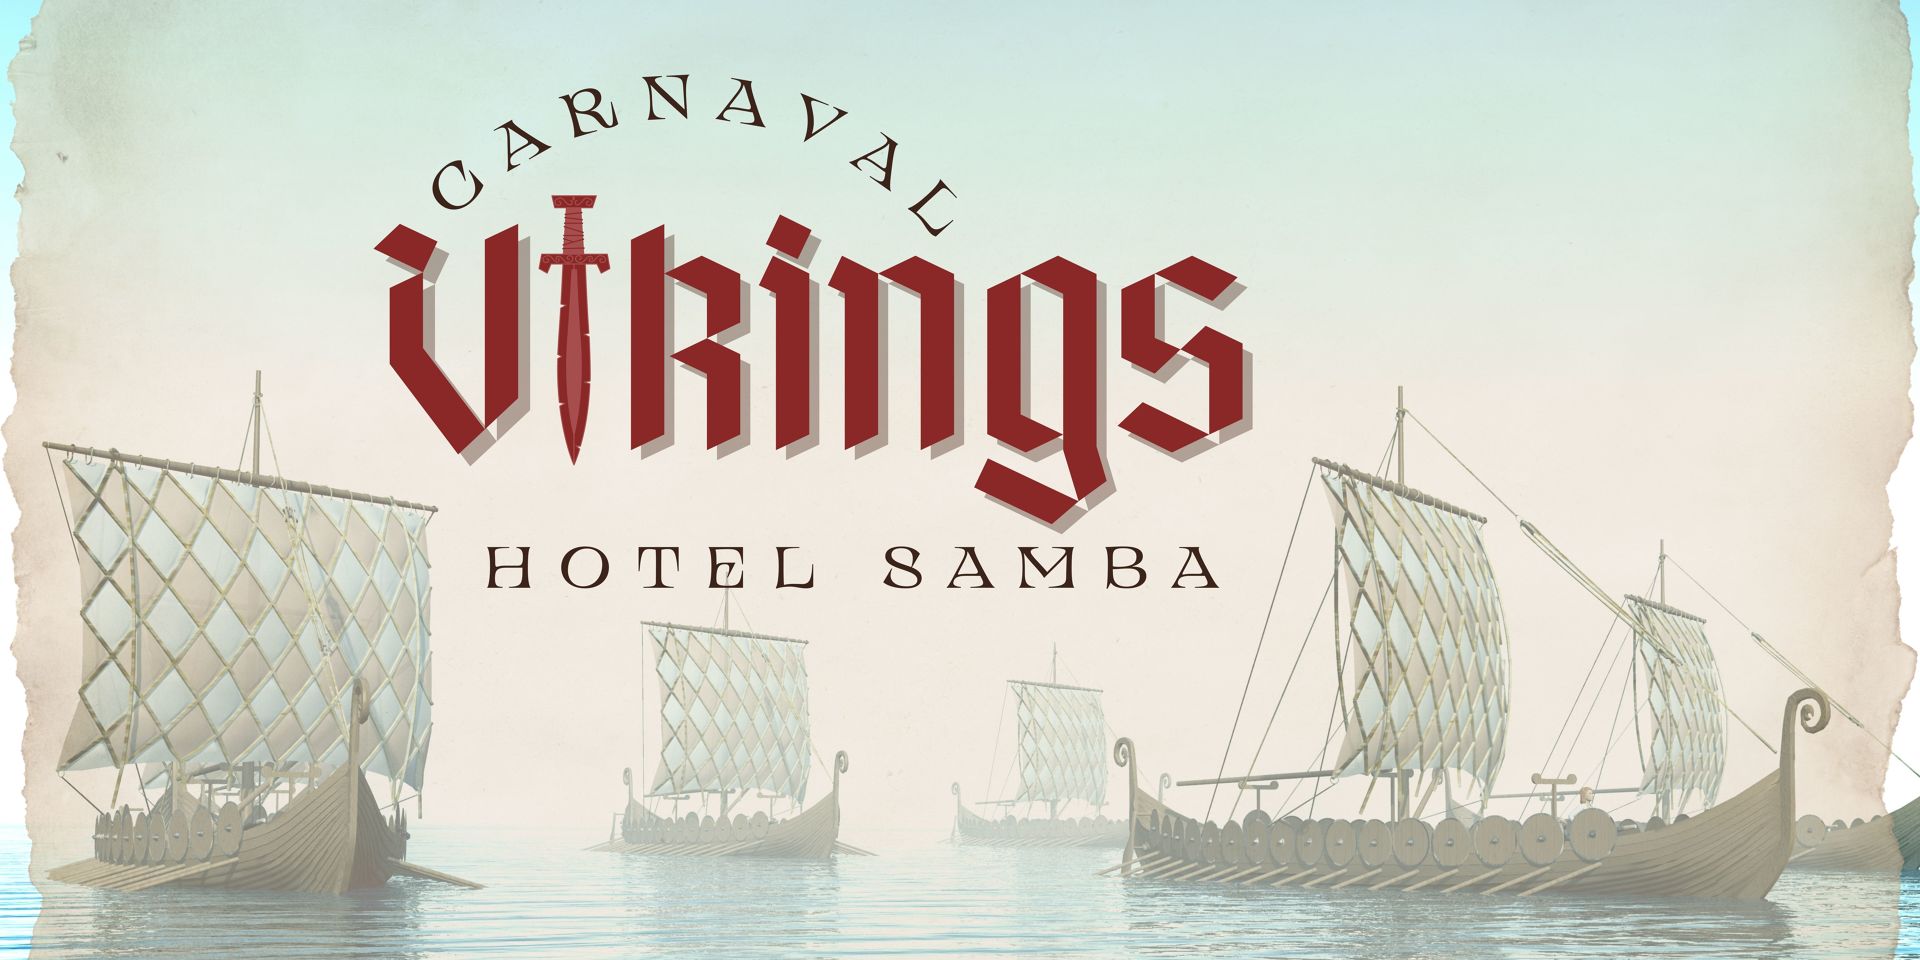 Carnival 2022 at the Samba Hotel, travel with us to Ancient Egypt